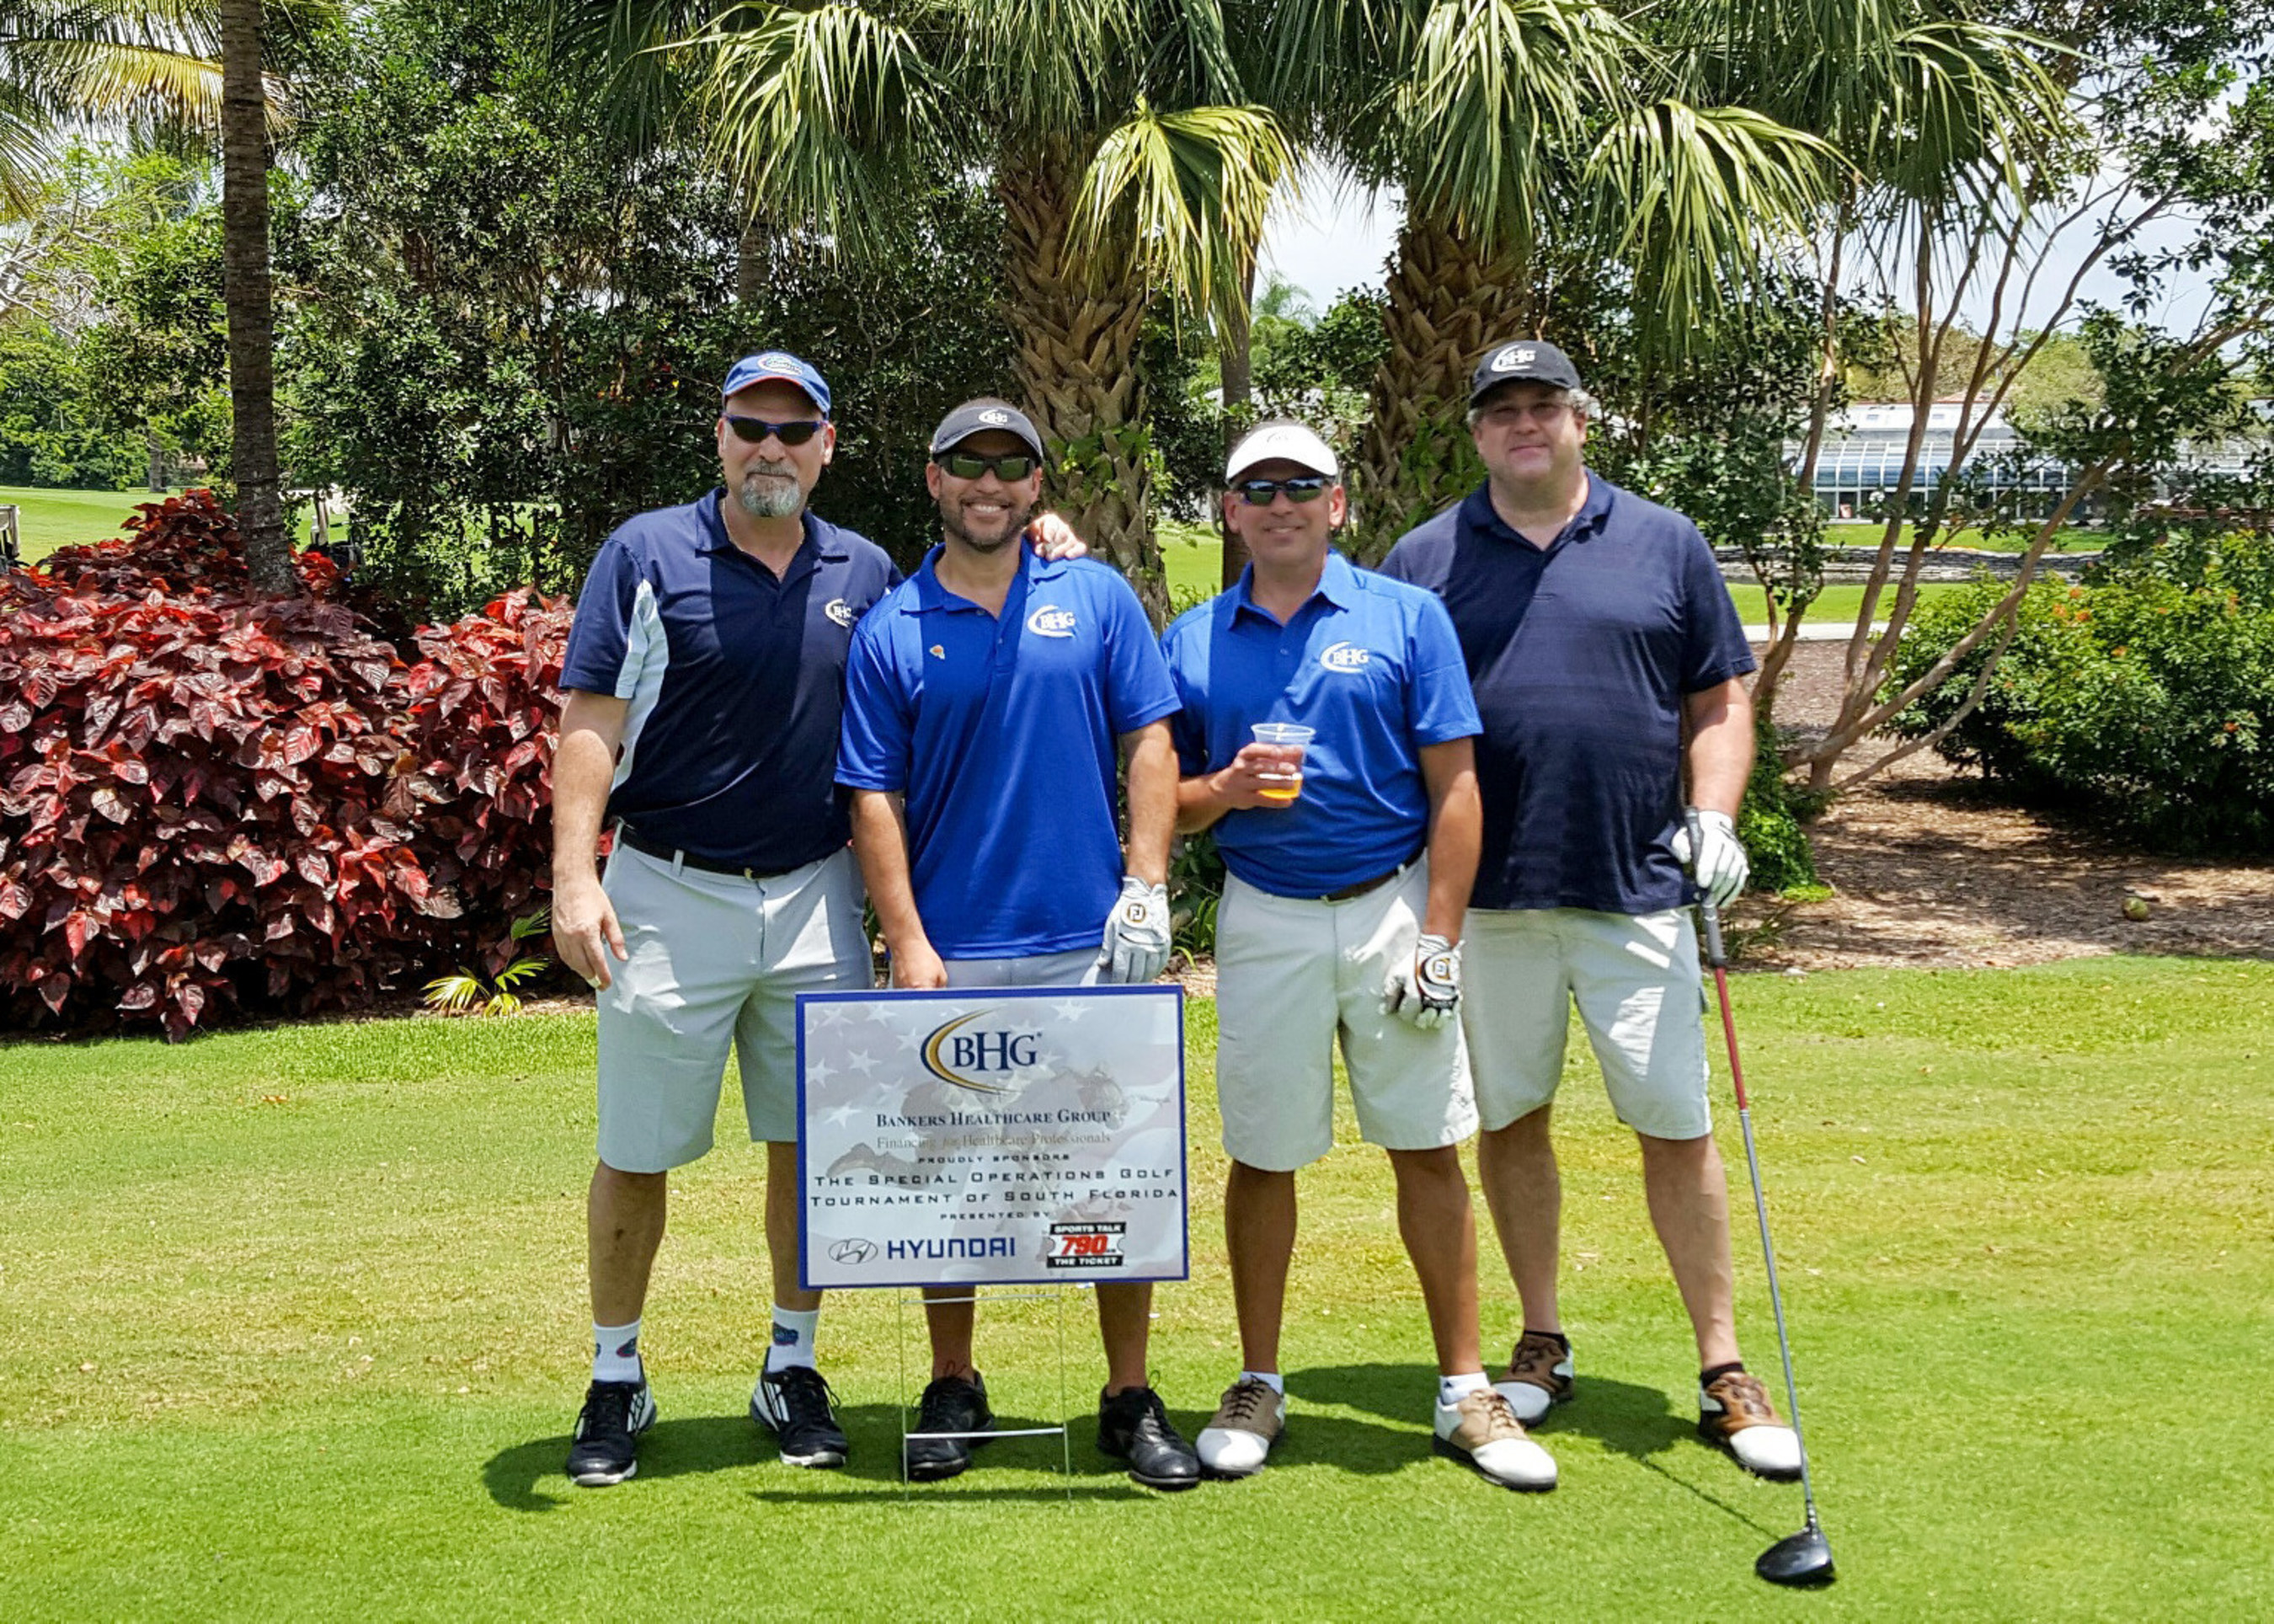 Bankers Healthcare Group showed its support for military families by sponsoring the Special Operations Golf Tournament of South Florida held Saturday, May 14, 2016 at Jacaranda Golf Club.